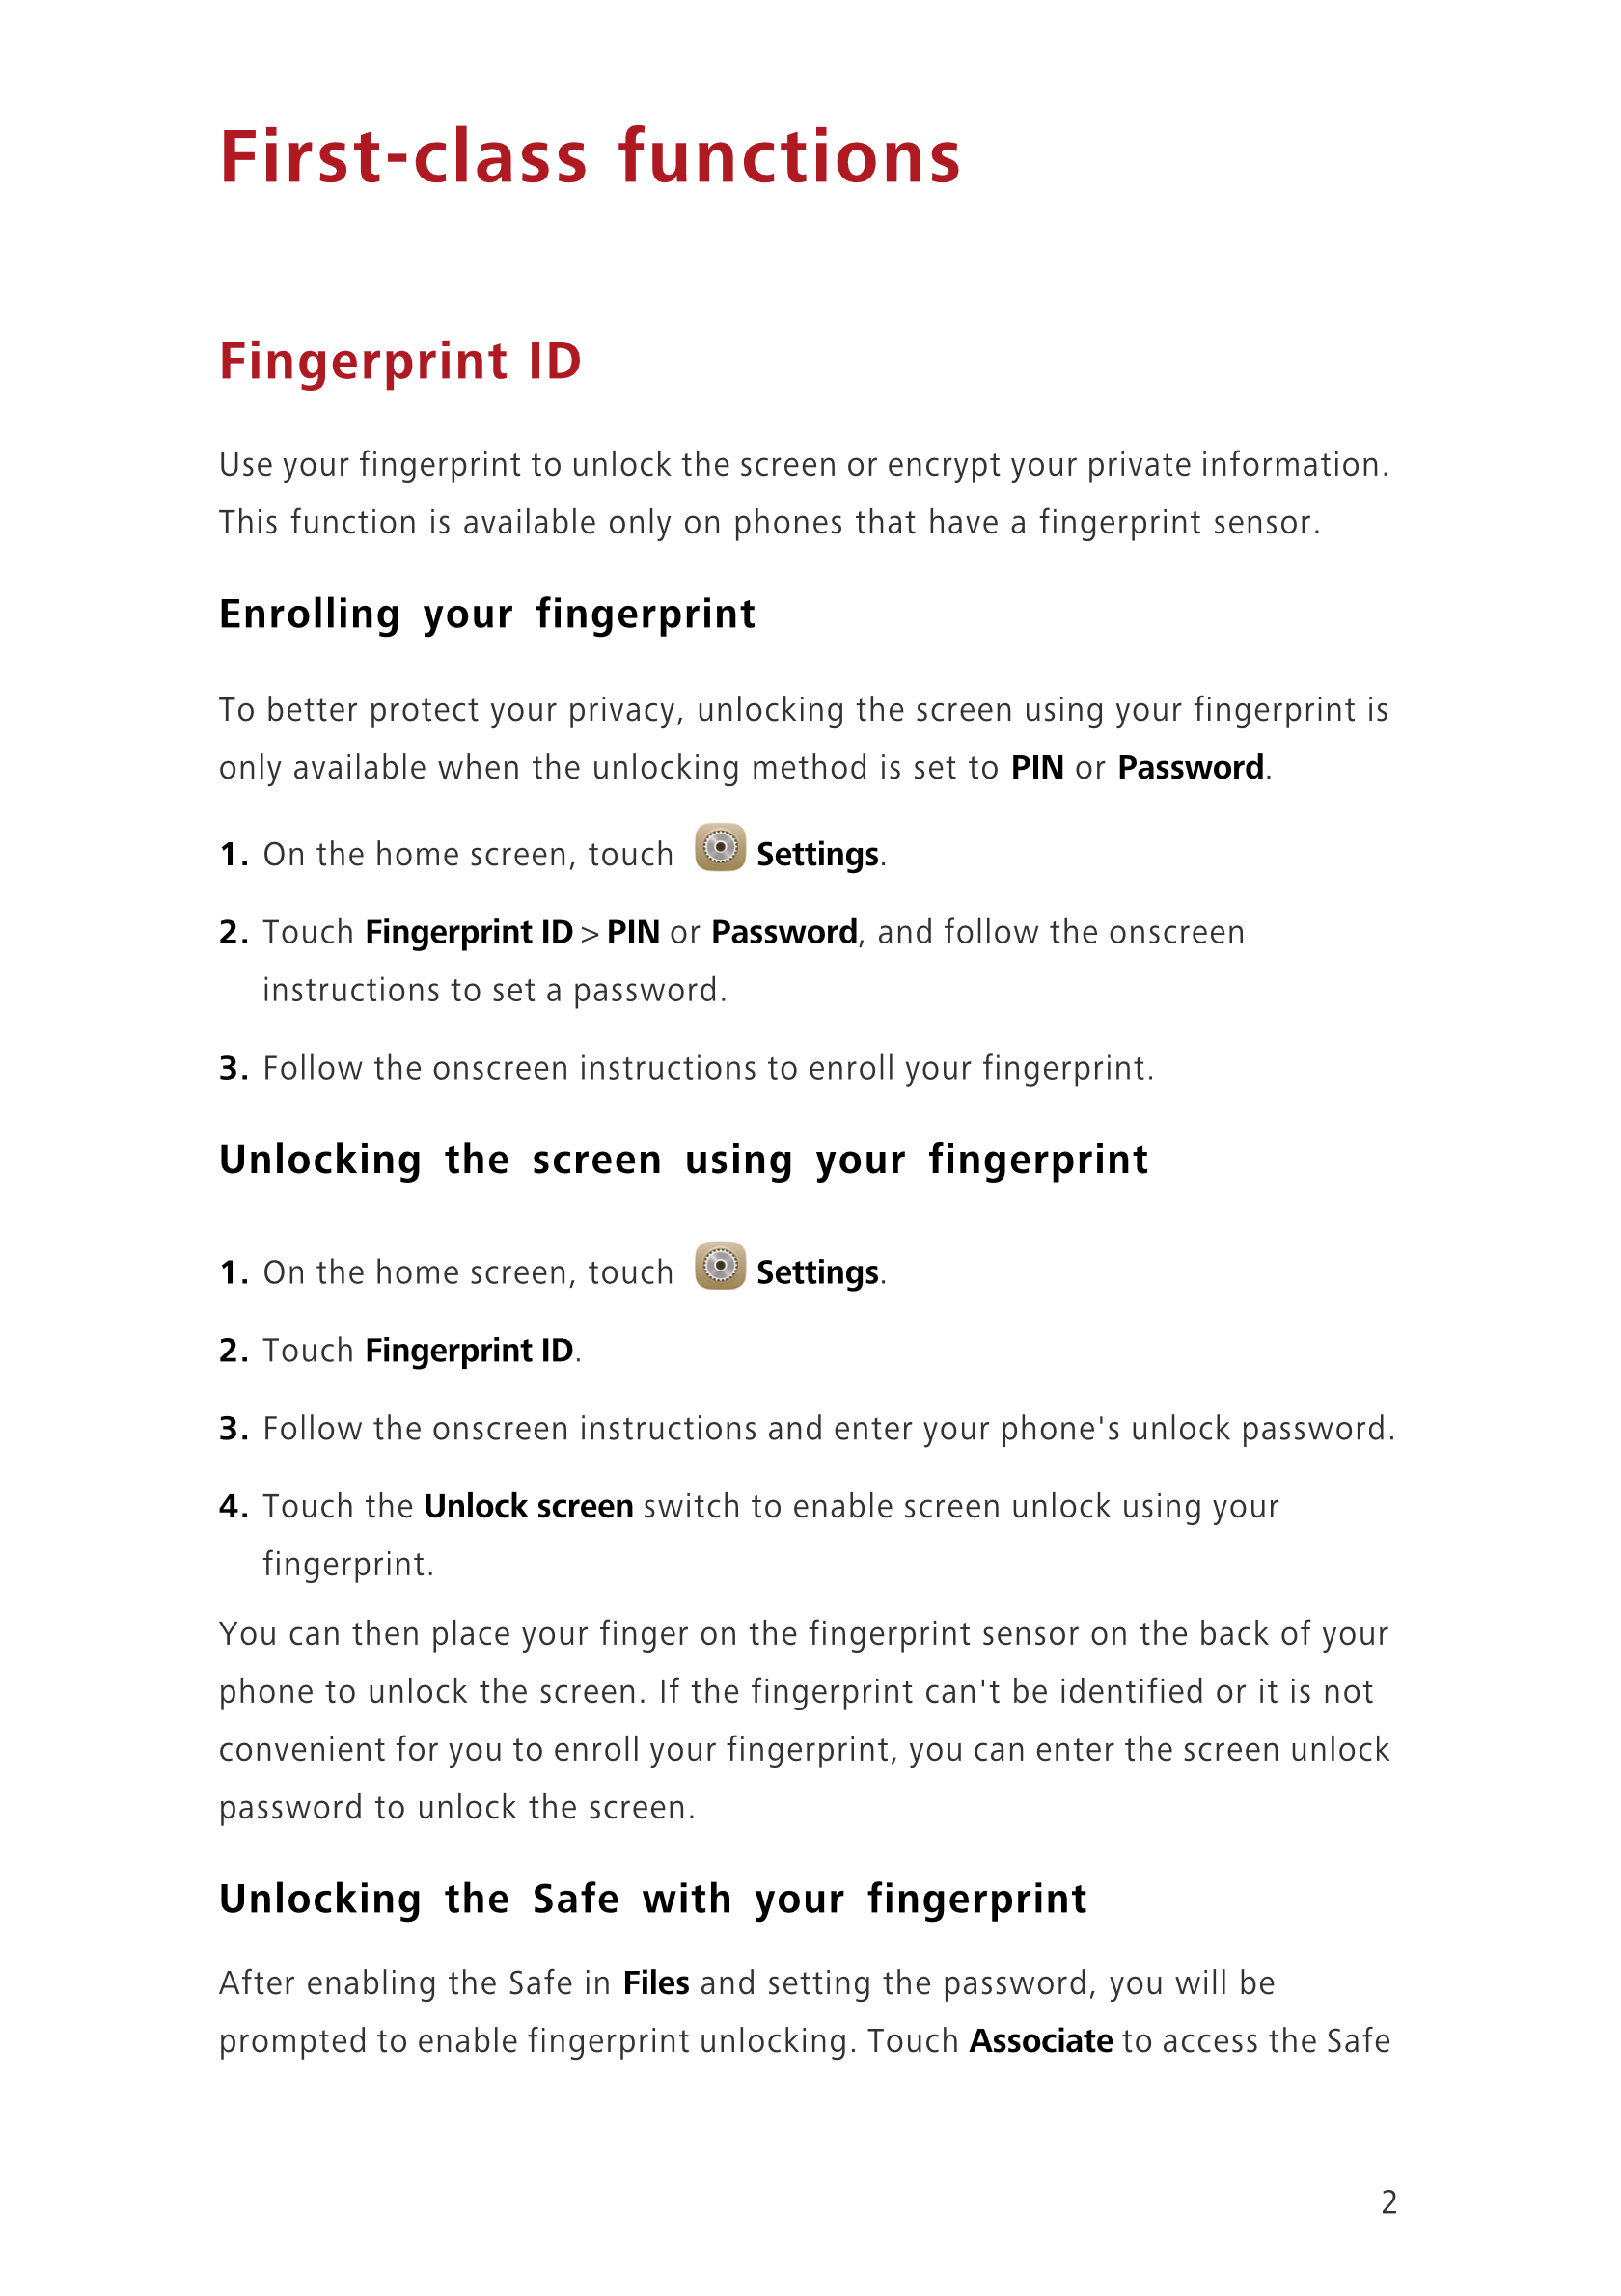 First-class functions
Fingerprint ID
Use your fingerprint to unlock the screen or encrypt your private information. 
This functi